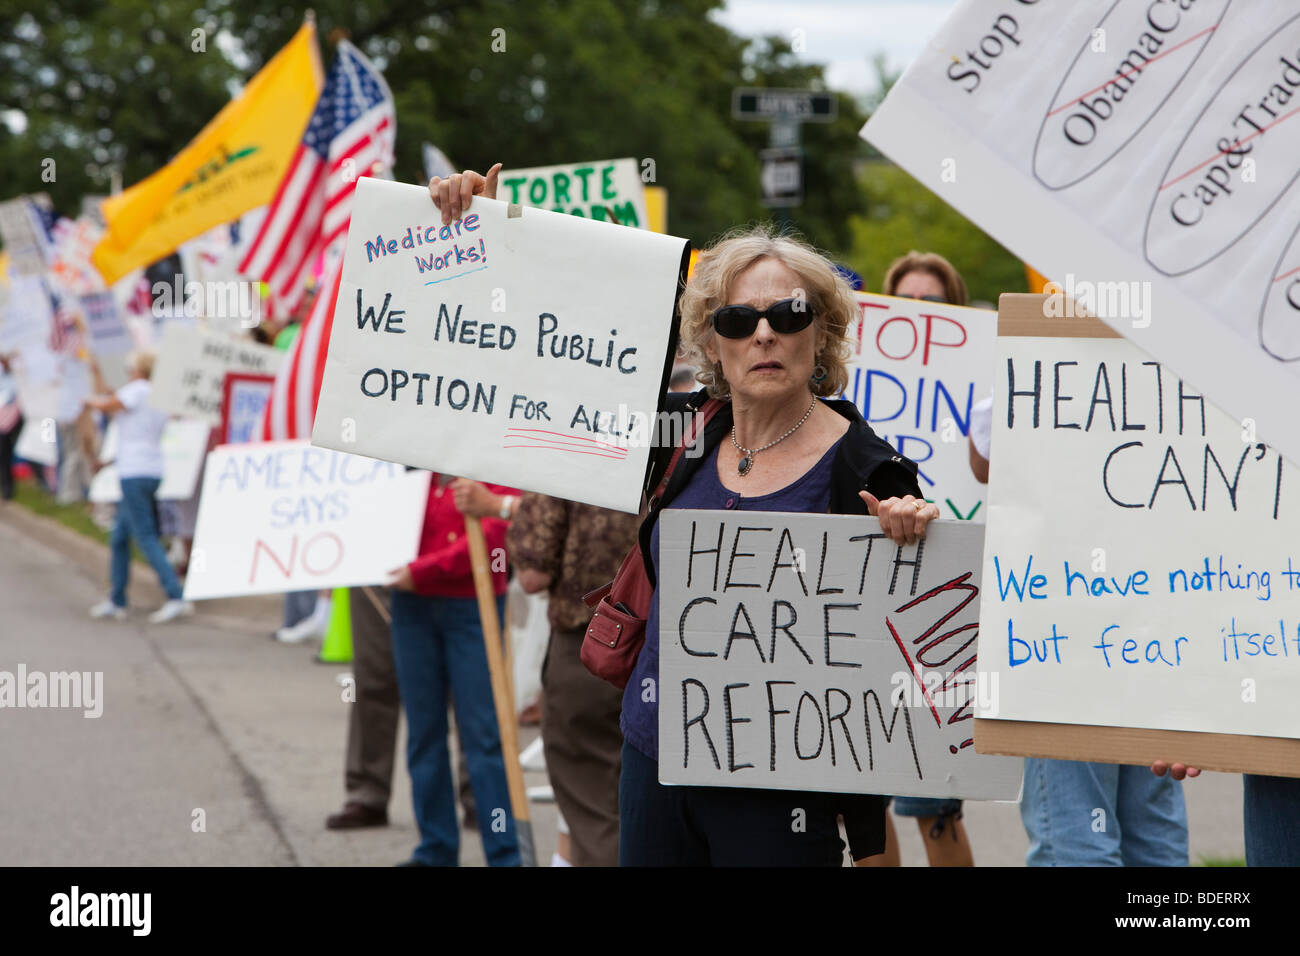 A supporter of health care reform holds up her signs while surrounded by people opposed reform proposals Stock Photo